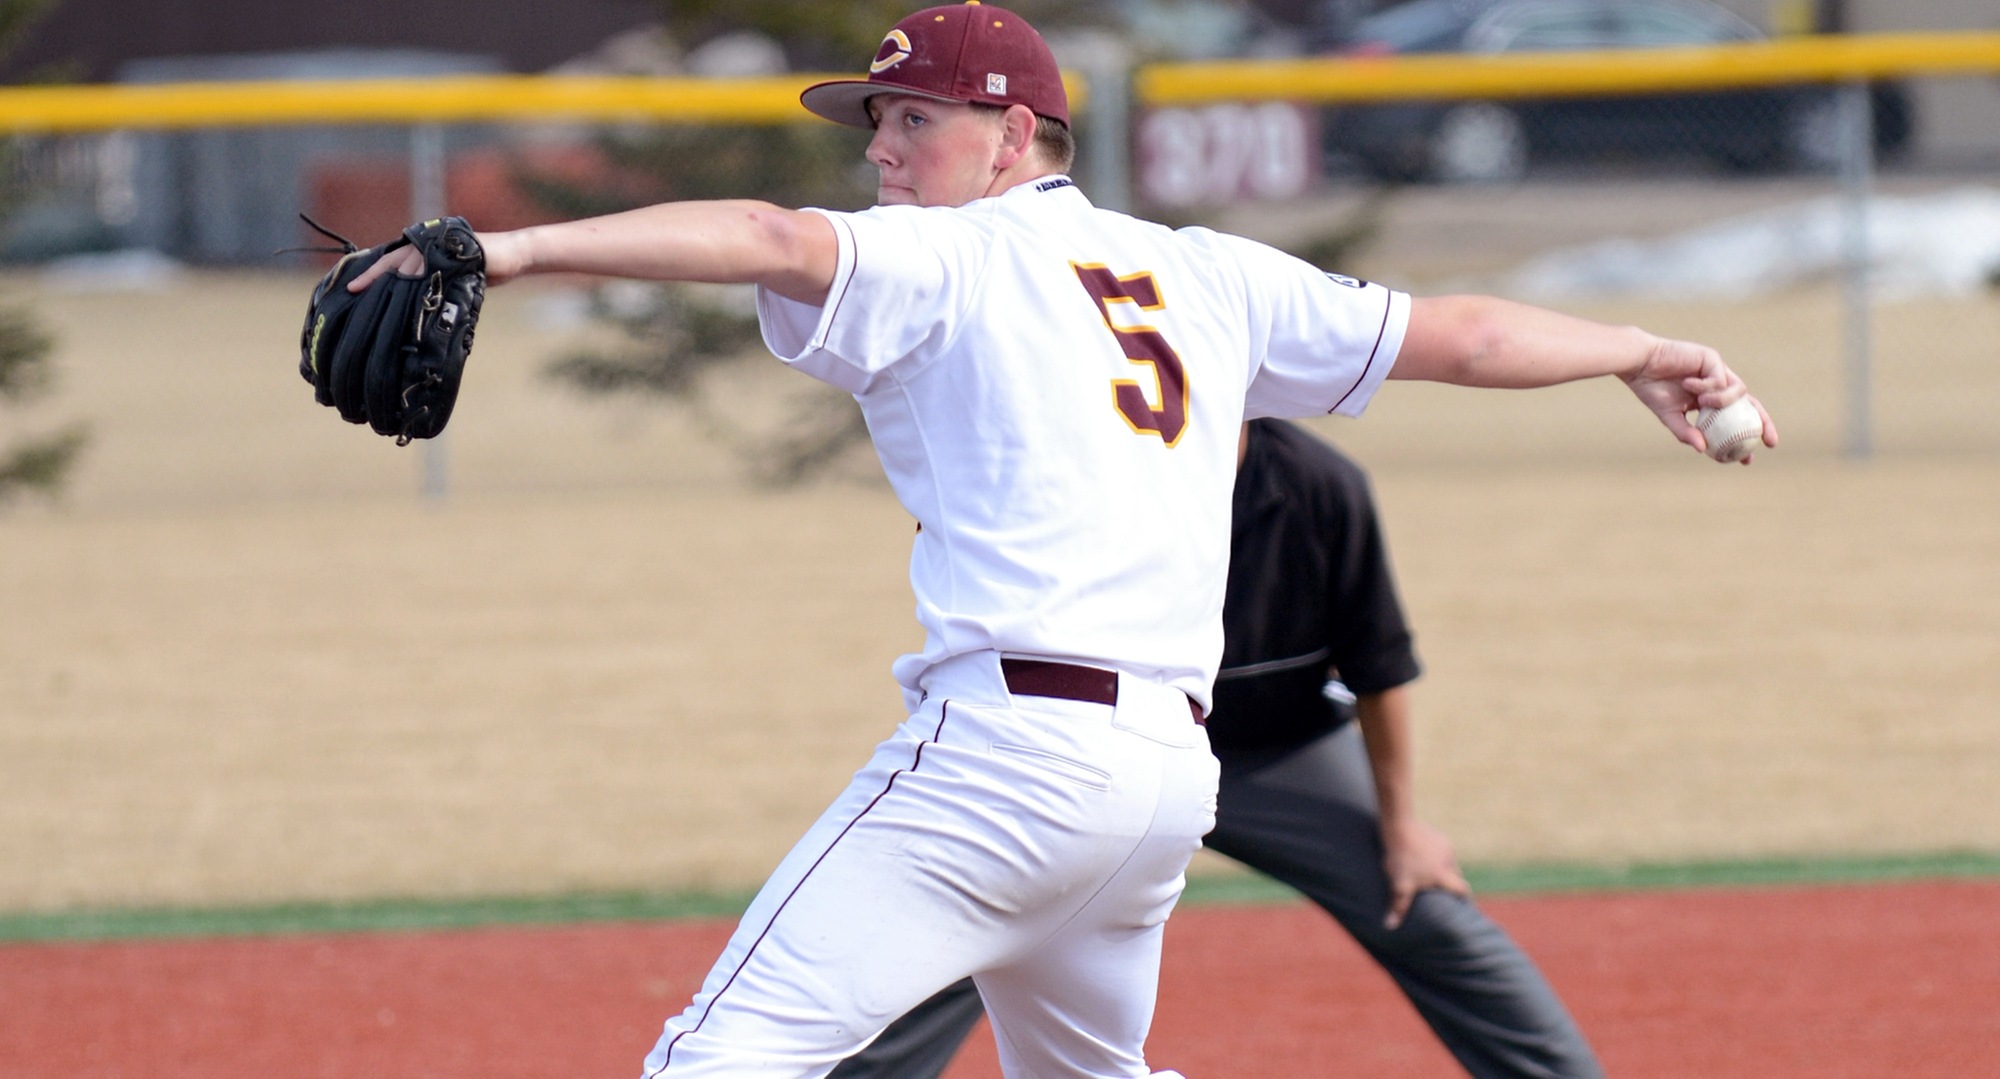 Junior pitcher Cole Christensen pitched the first six innings of the Cobbers' opener against MSOE. He didn't allow an earned run and struck out six to get his first win of the year.